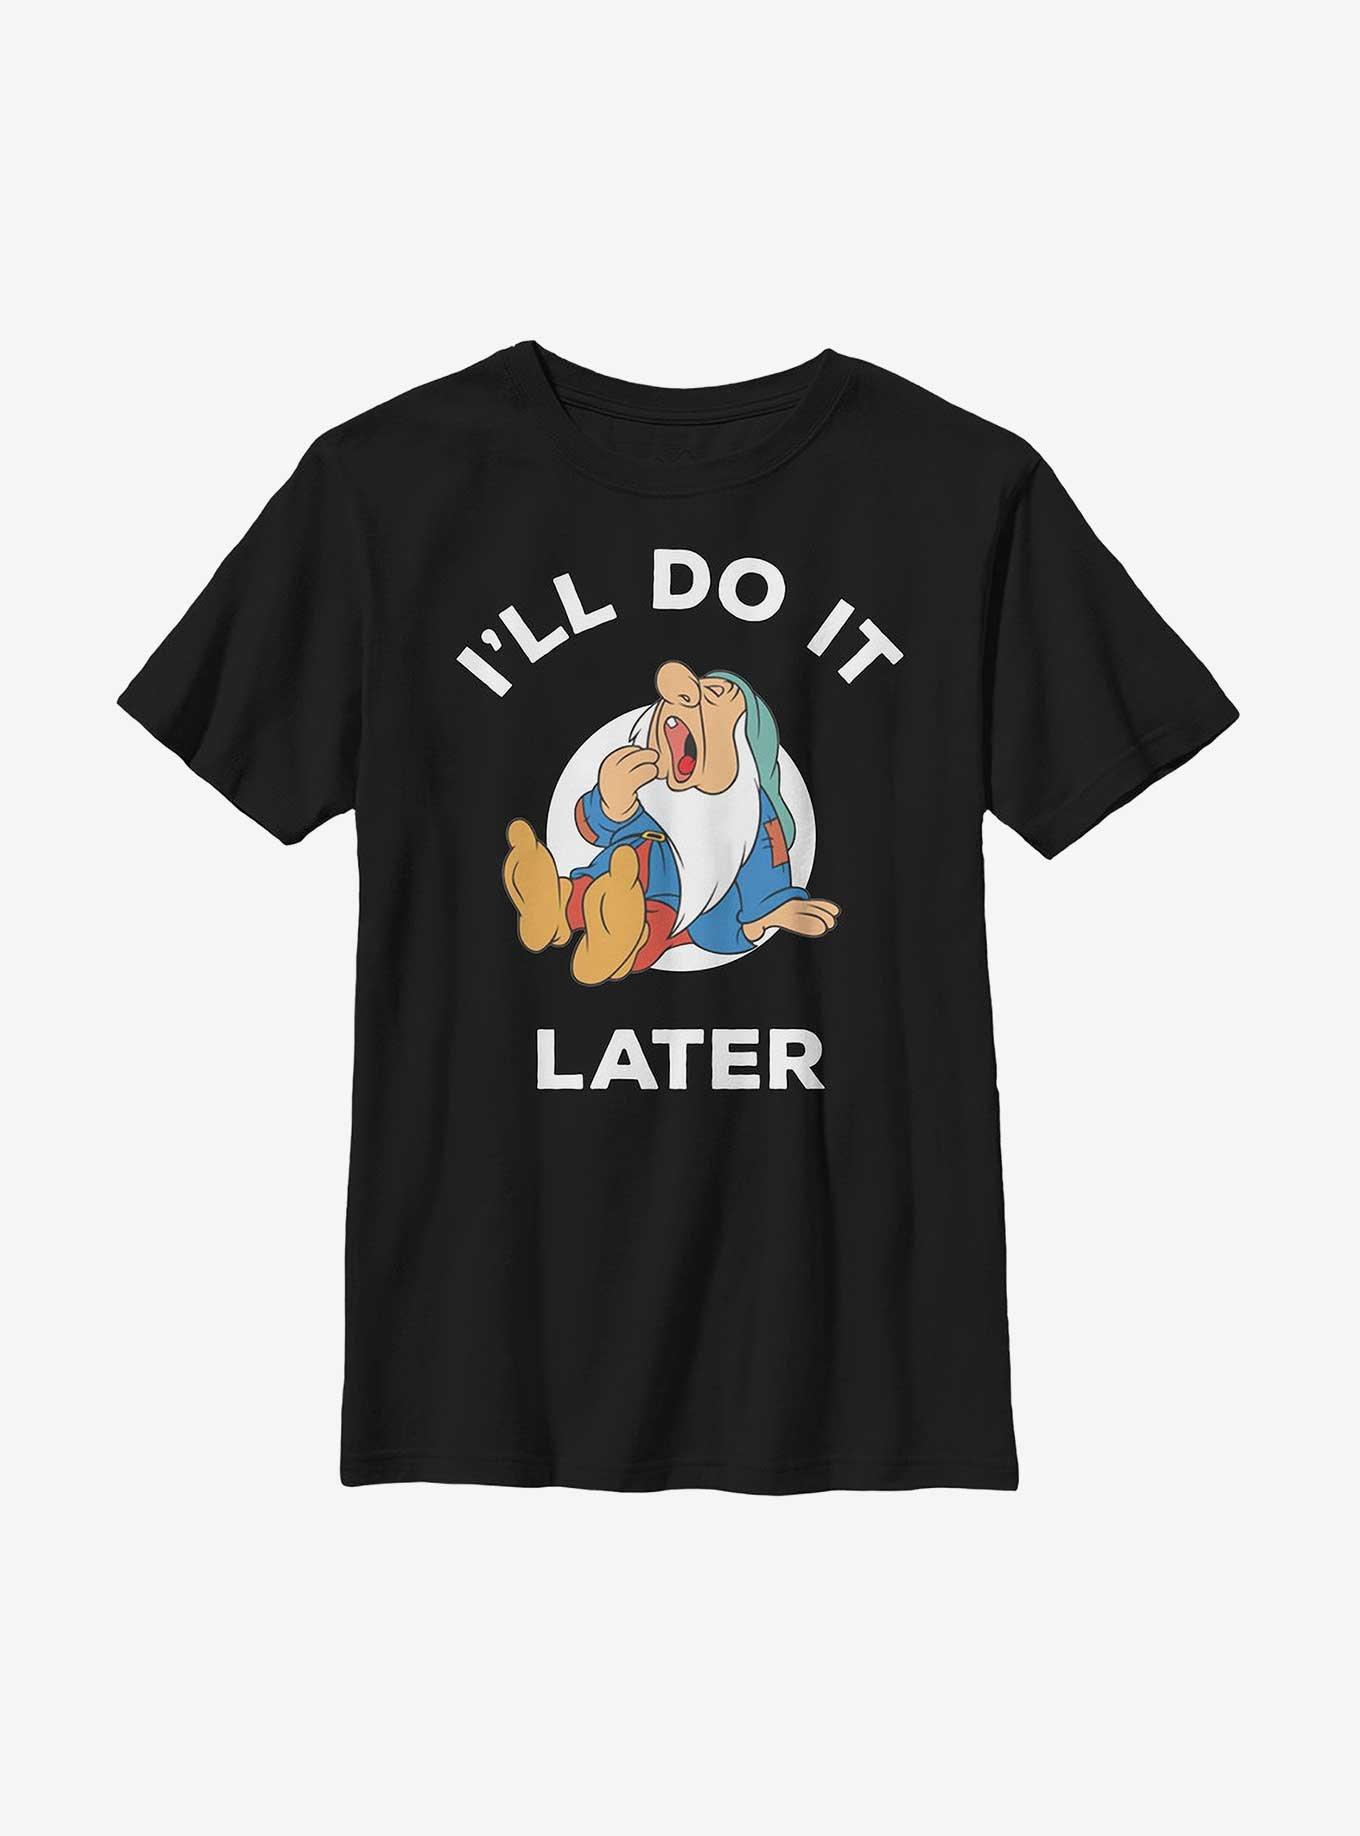 Disney Snow White And The Seven Dwarfs Sleepy Do It Later Youth T-Shirt, BLACK, hi-res